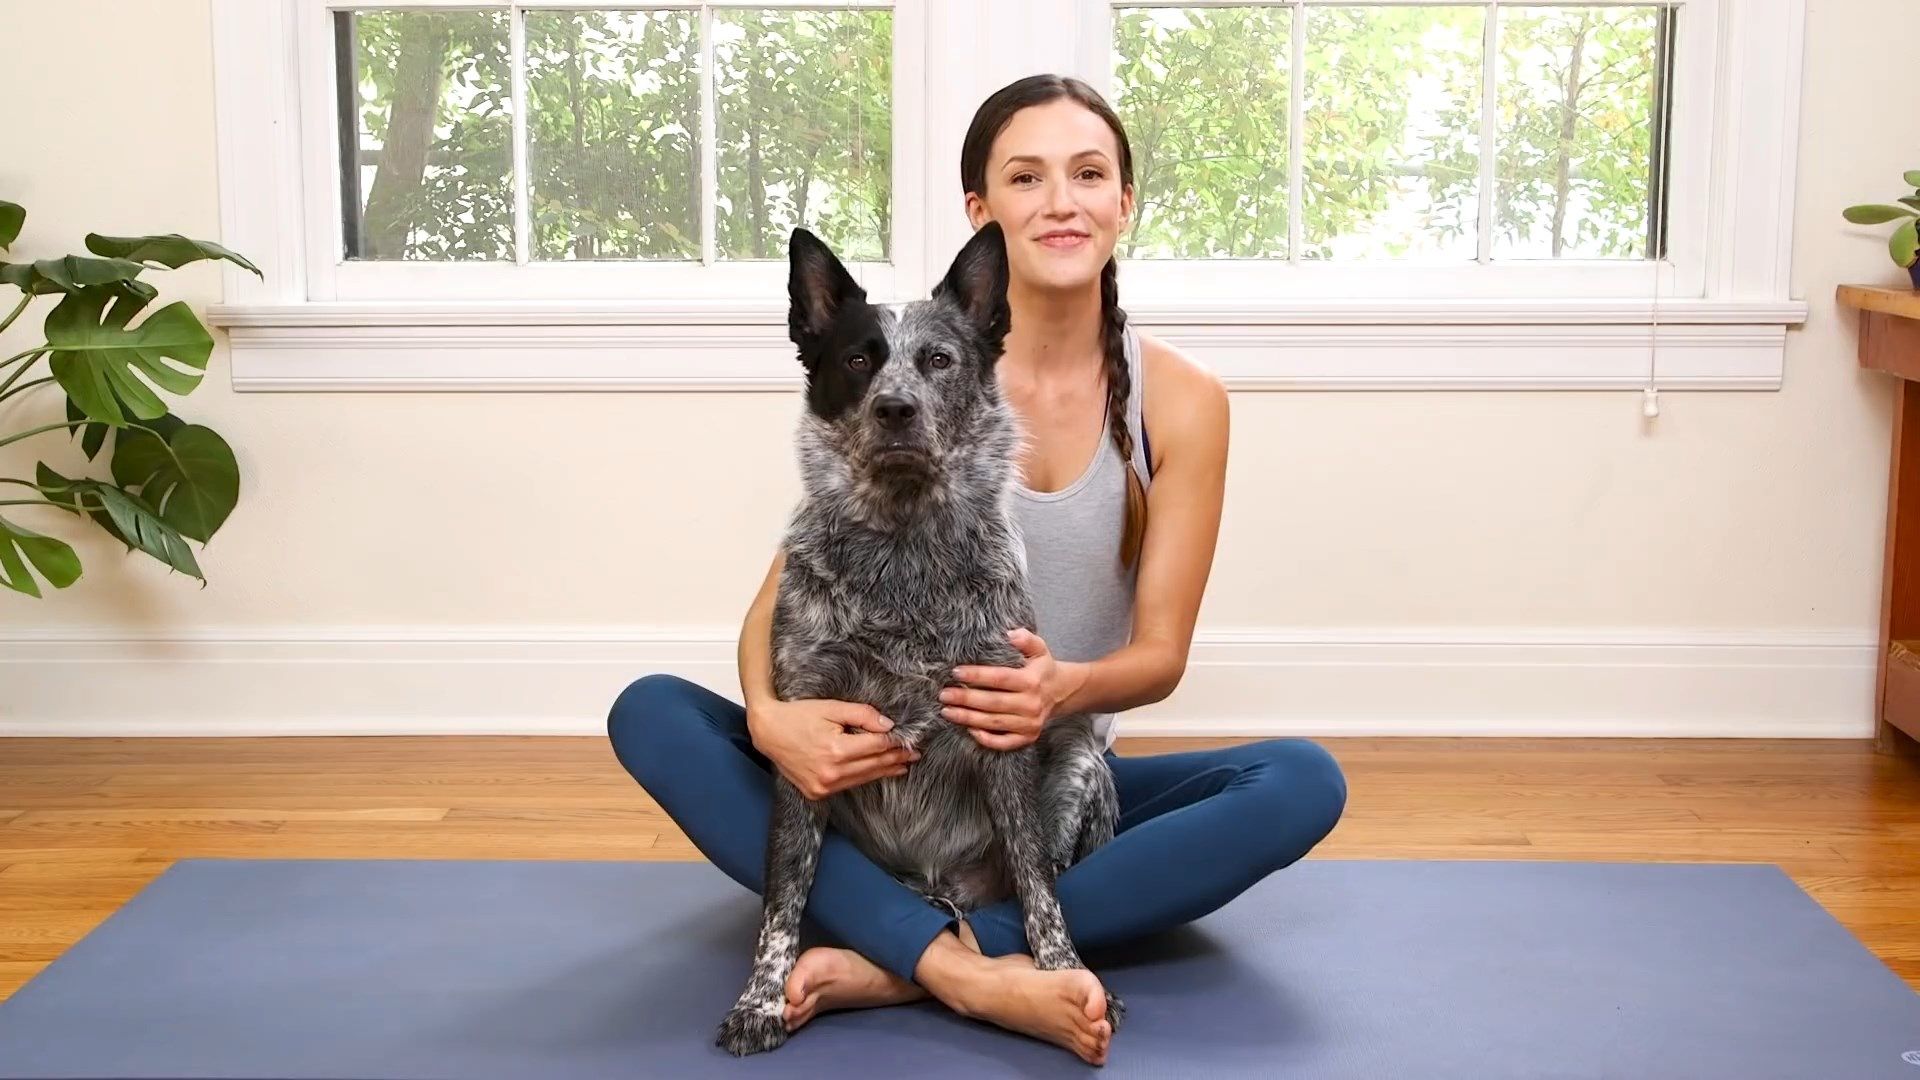 A day in the life of the social media star behind Yoga with Adriene